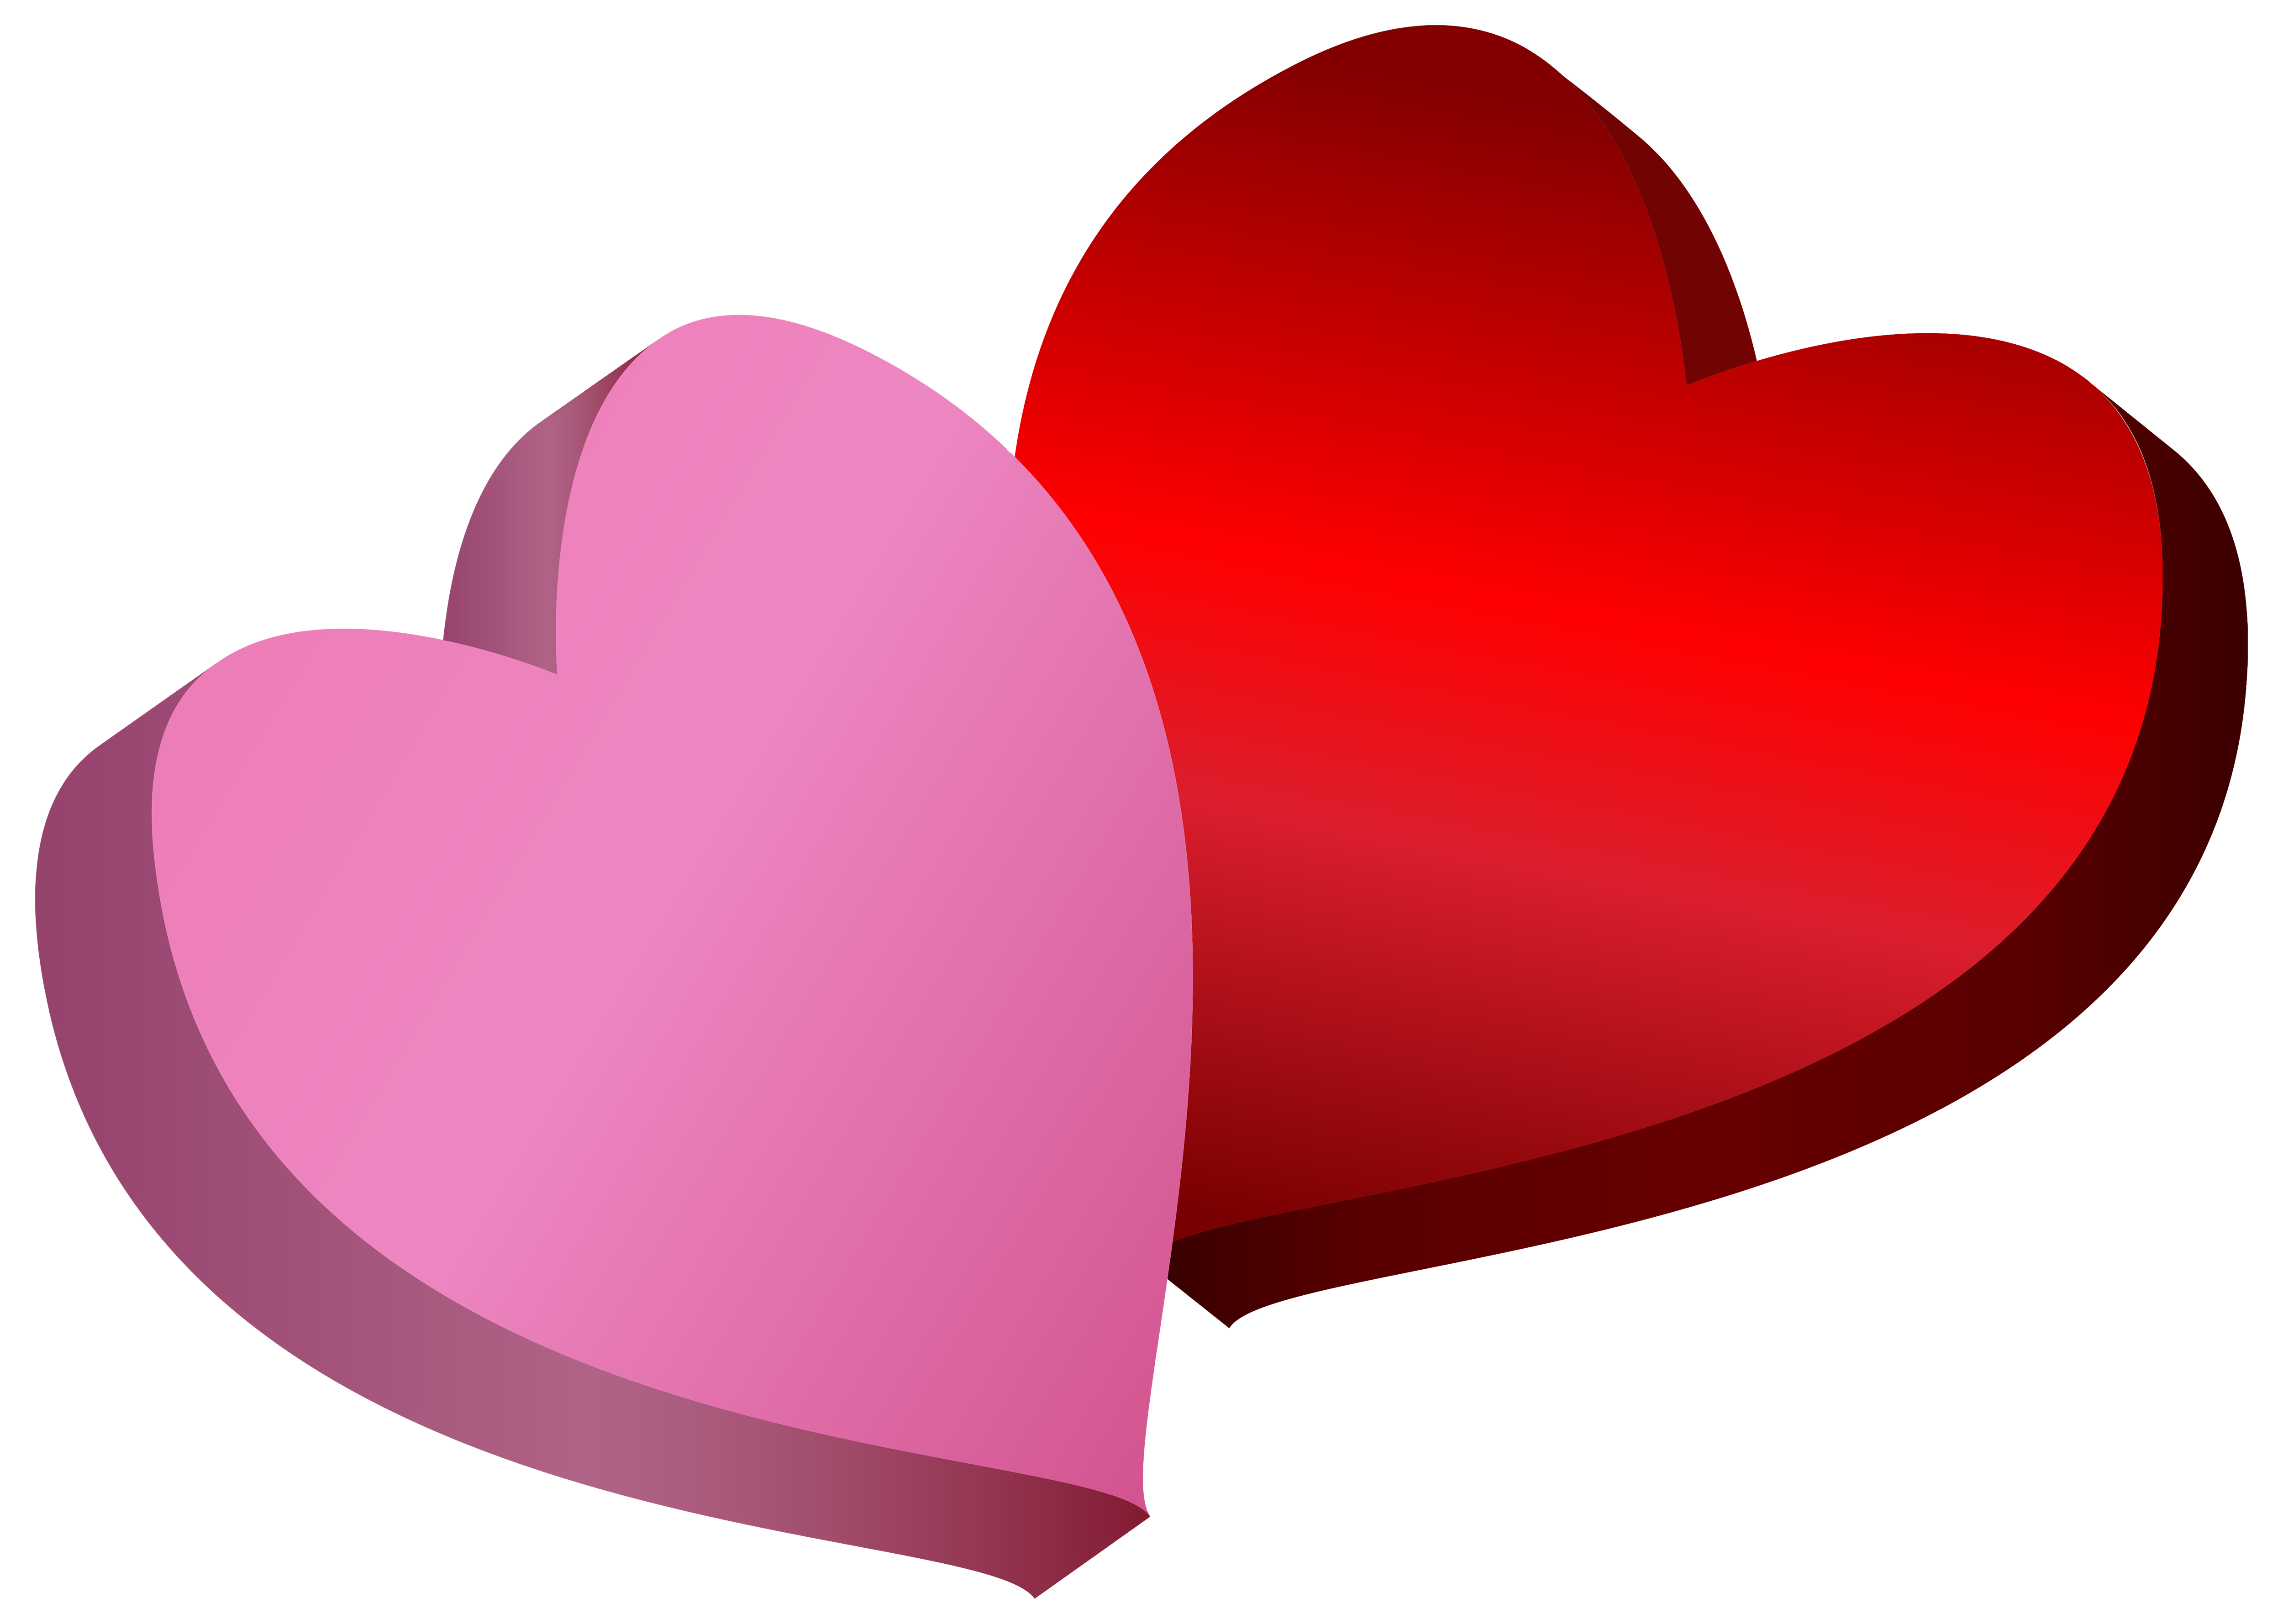 pink heart clipart png